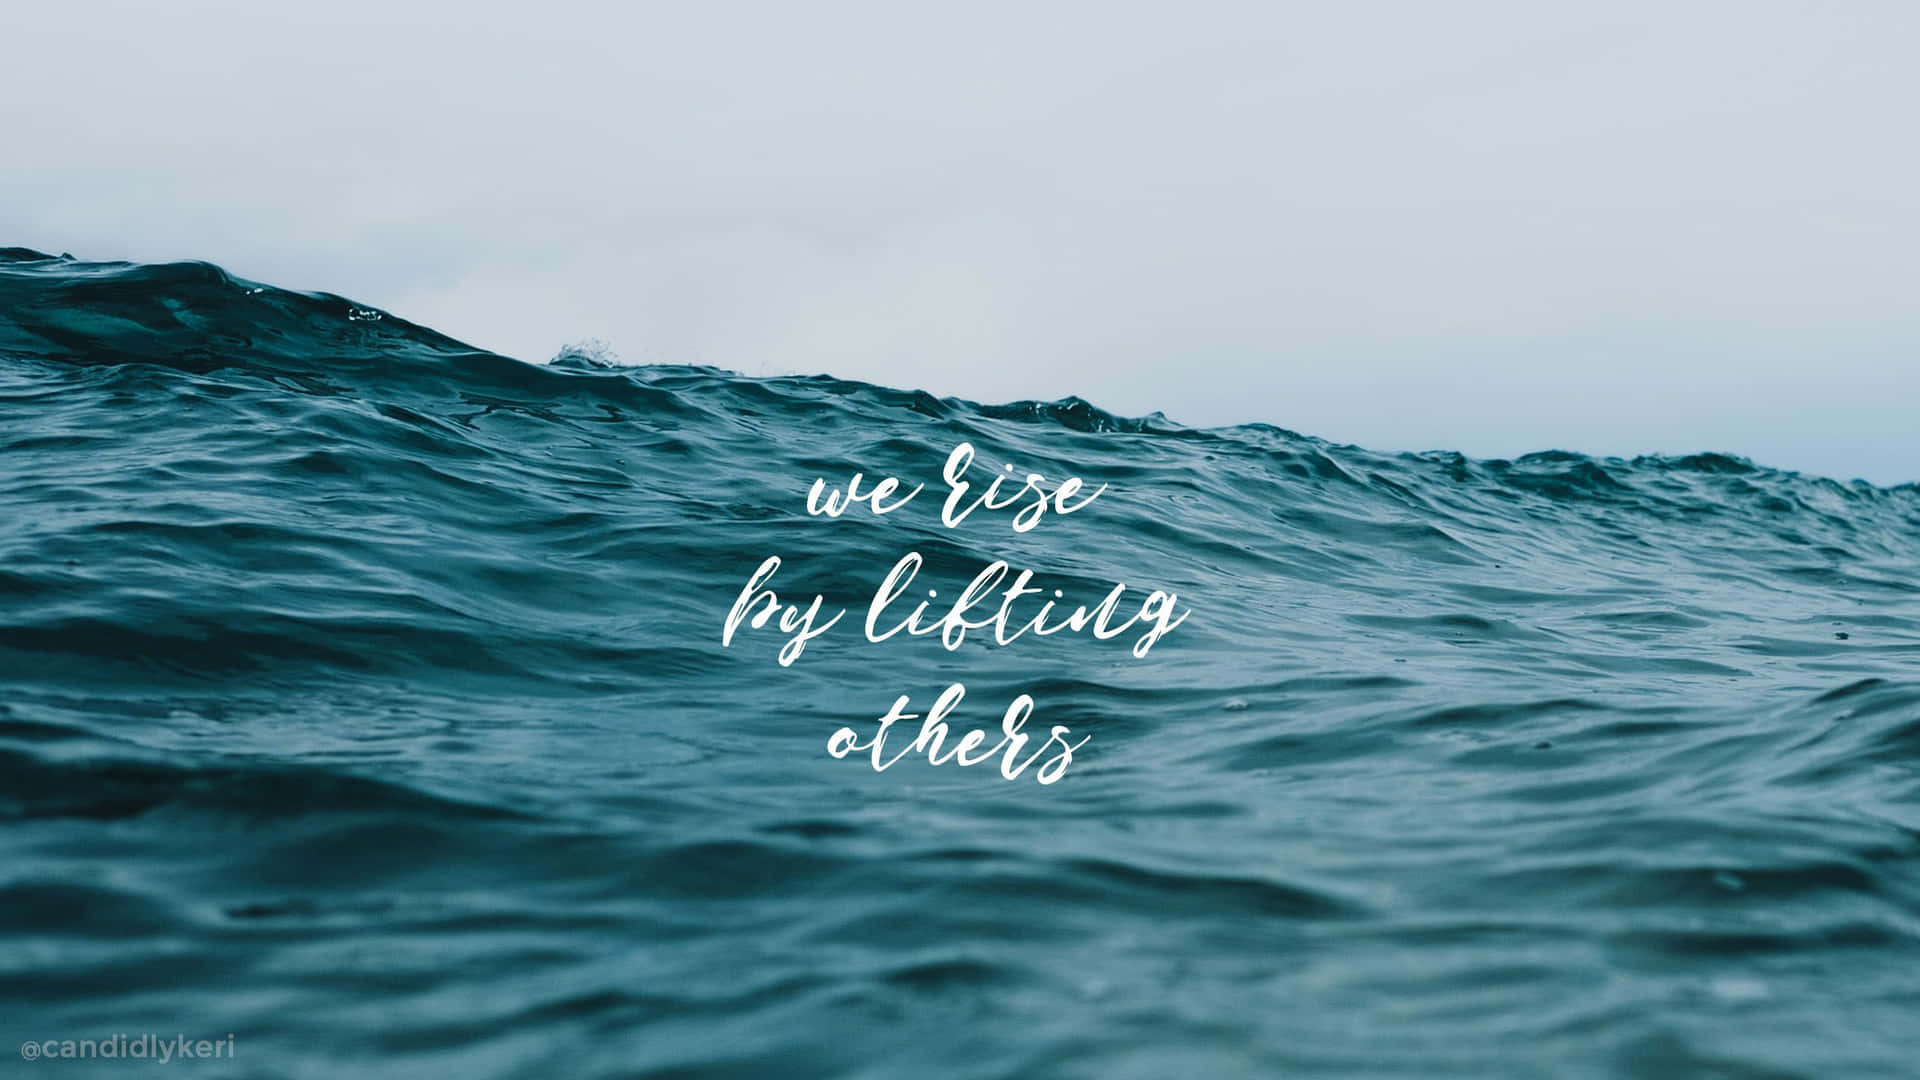 Quote On Sea Waves Aesthetic Picture